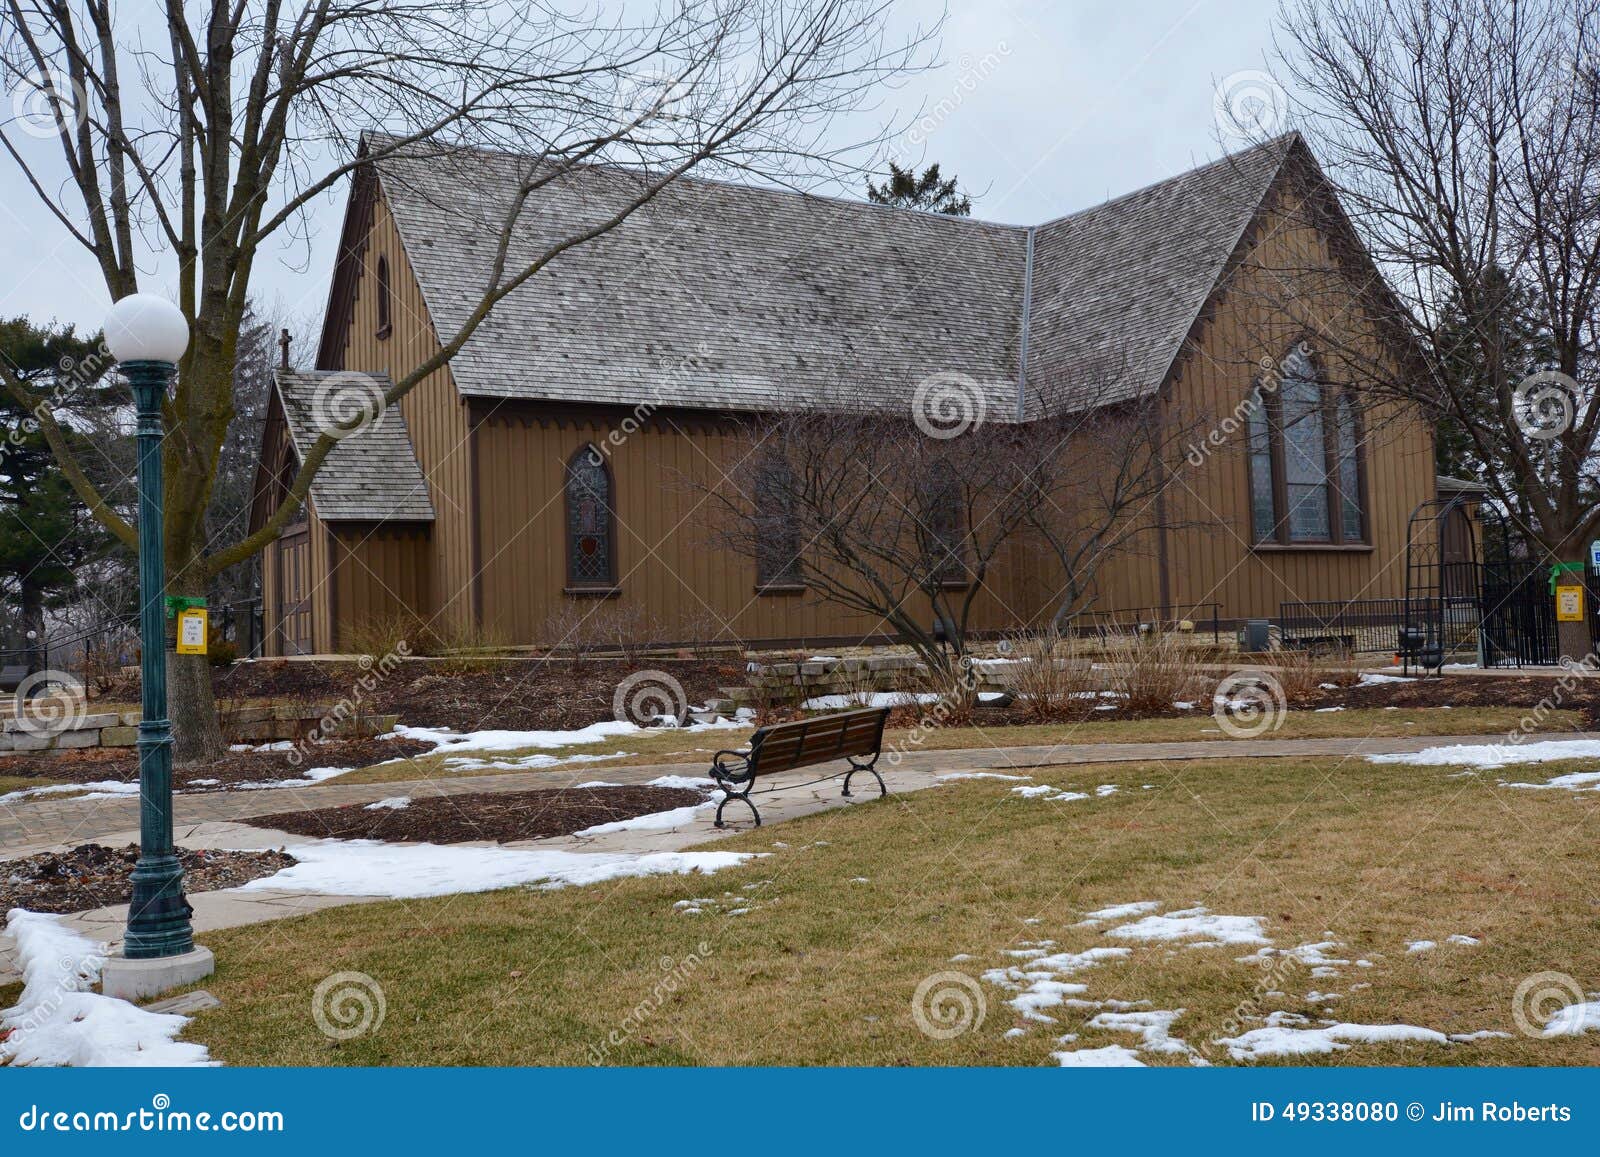 Century Memorial Chapel. This is a winter picture of St. Johns Episcopal Church in Naperville, Illinois. The church is an example of the Gothic Revival style of architecture and was built in the 1870s. This picture was taken on January 22, 2015.